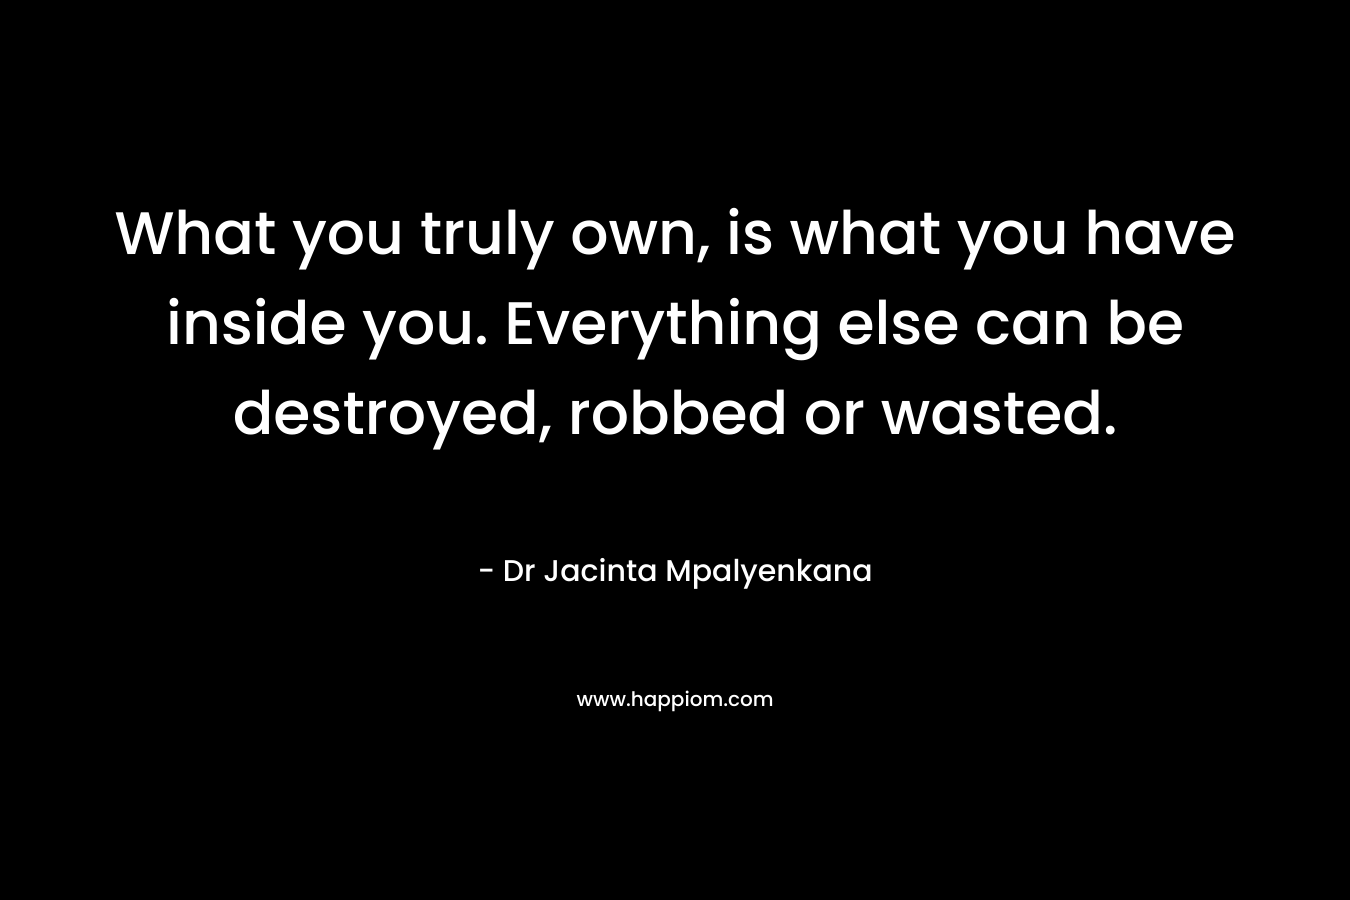 What you truly own, is what you have inside you. Everything else can be destroyed, robbed or wasted.